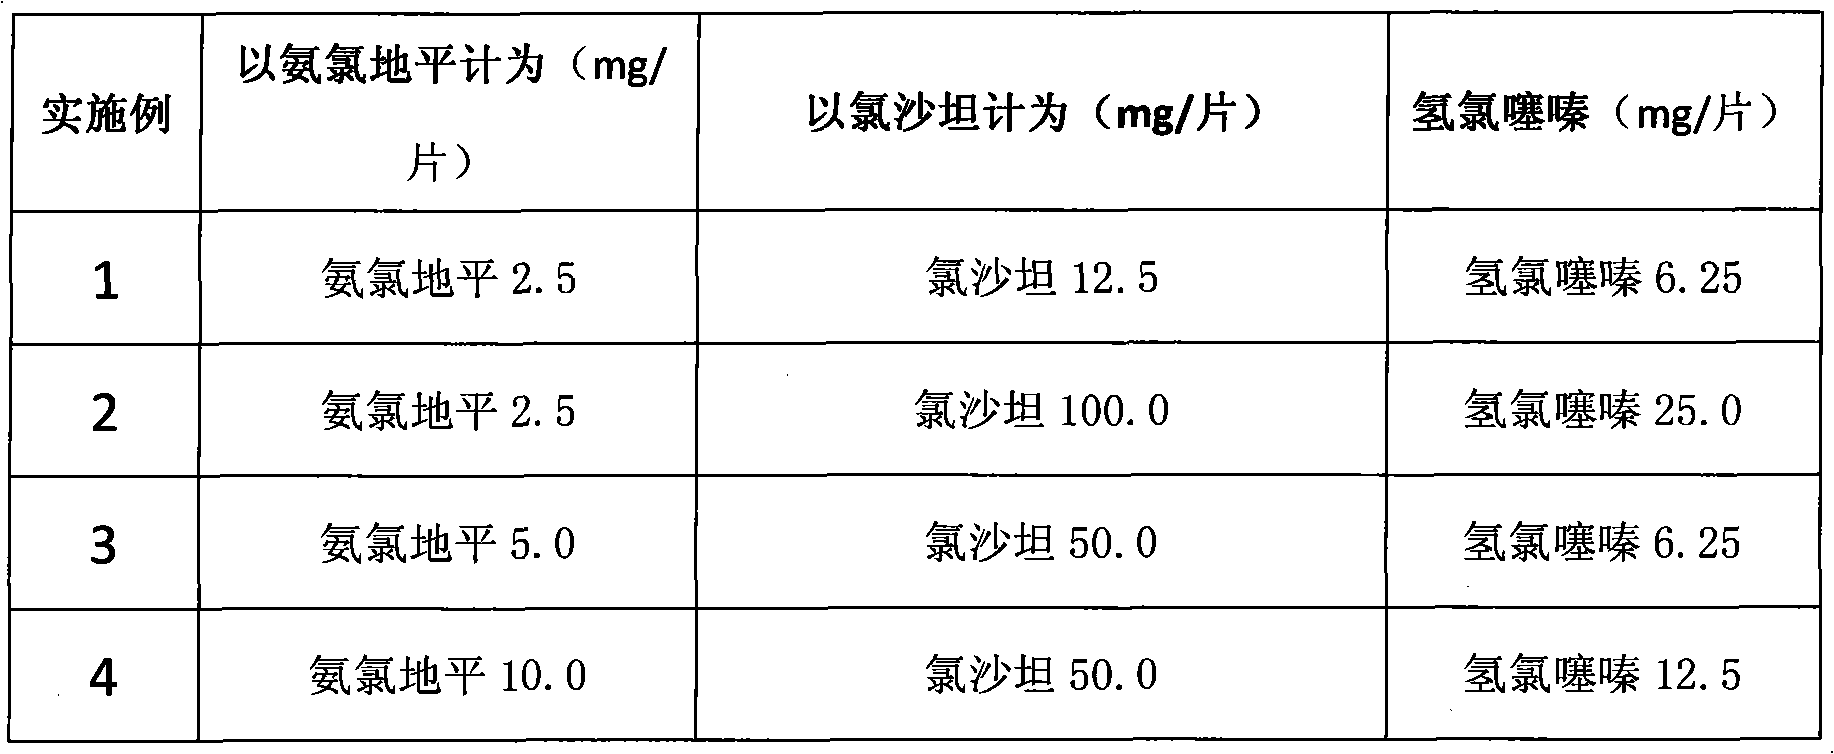 Amlodipine and losartan-containing compound preparation for treating hypertension